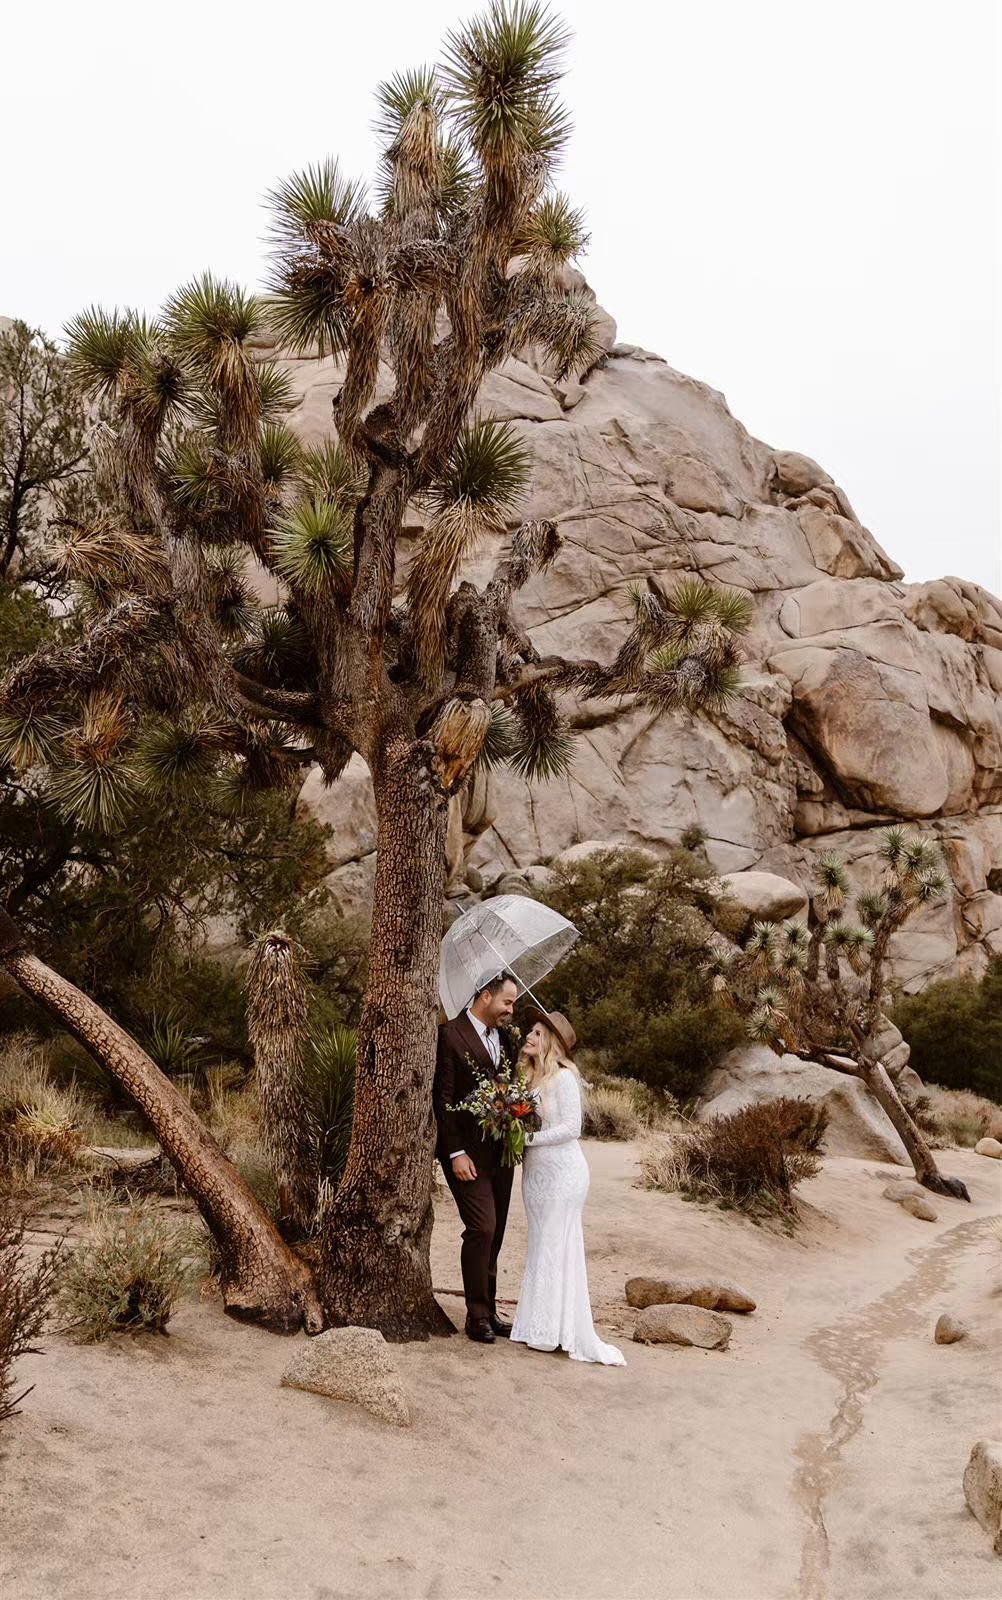 Bride and groom pose with clear umbrellas in Joshua Tree National Park